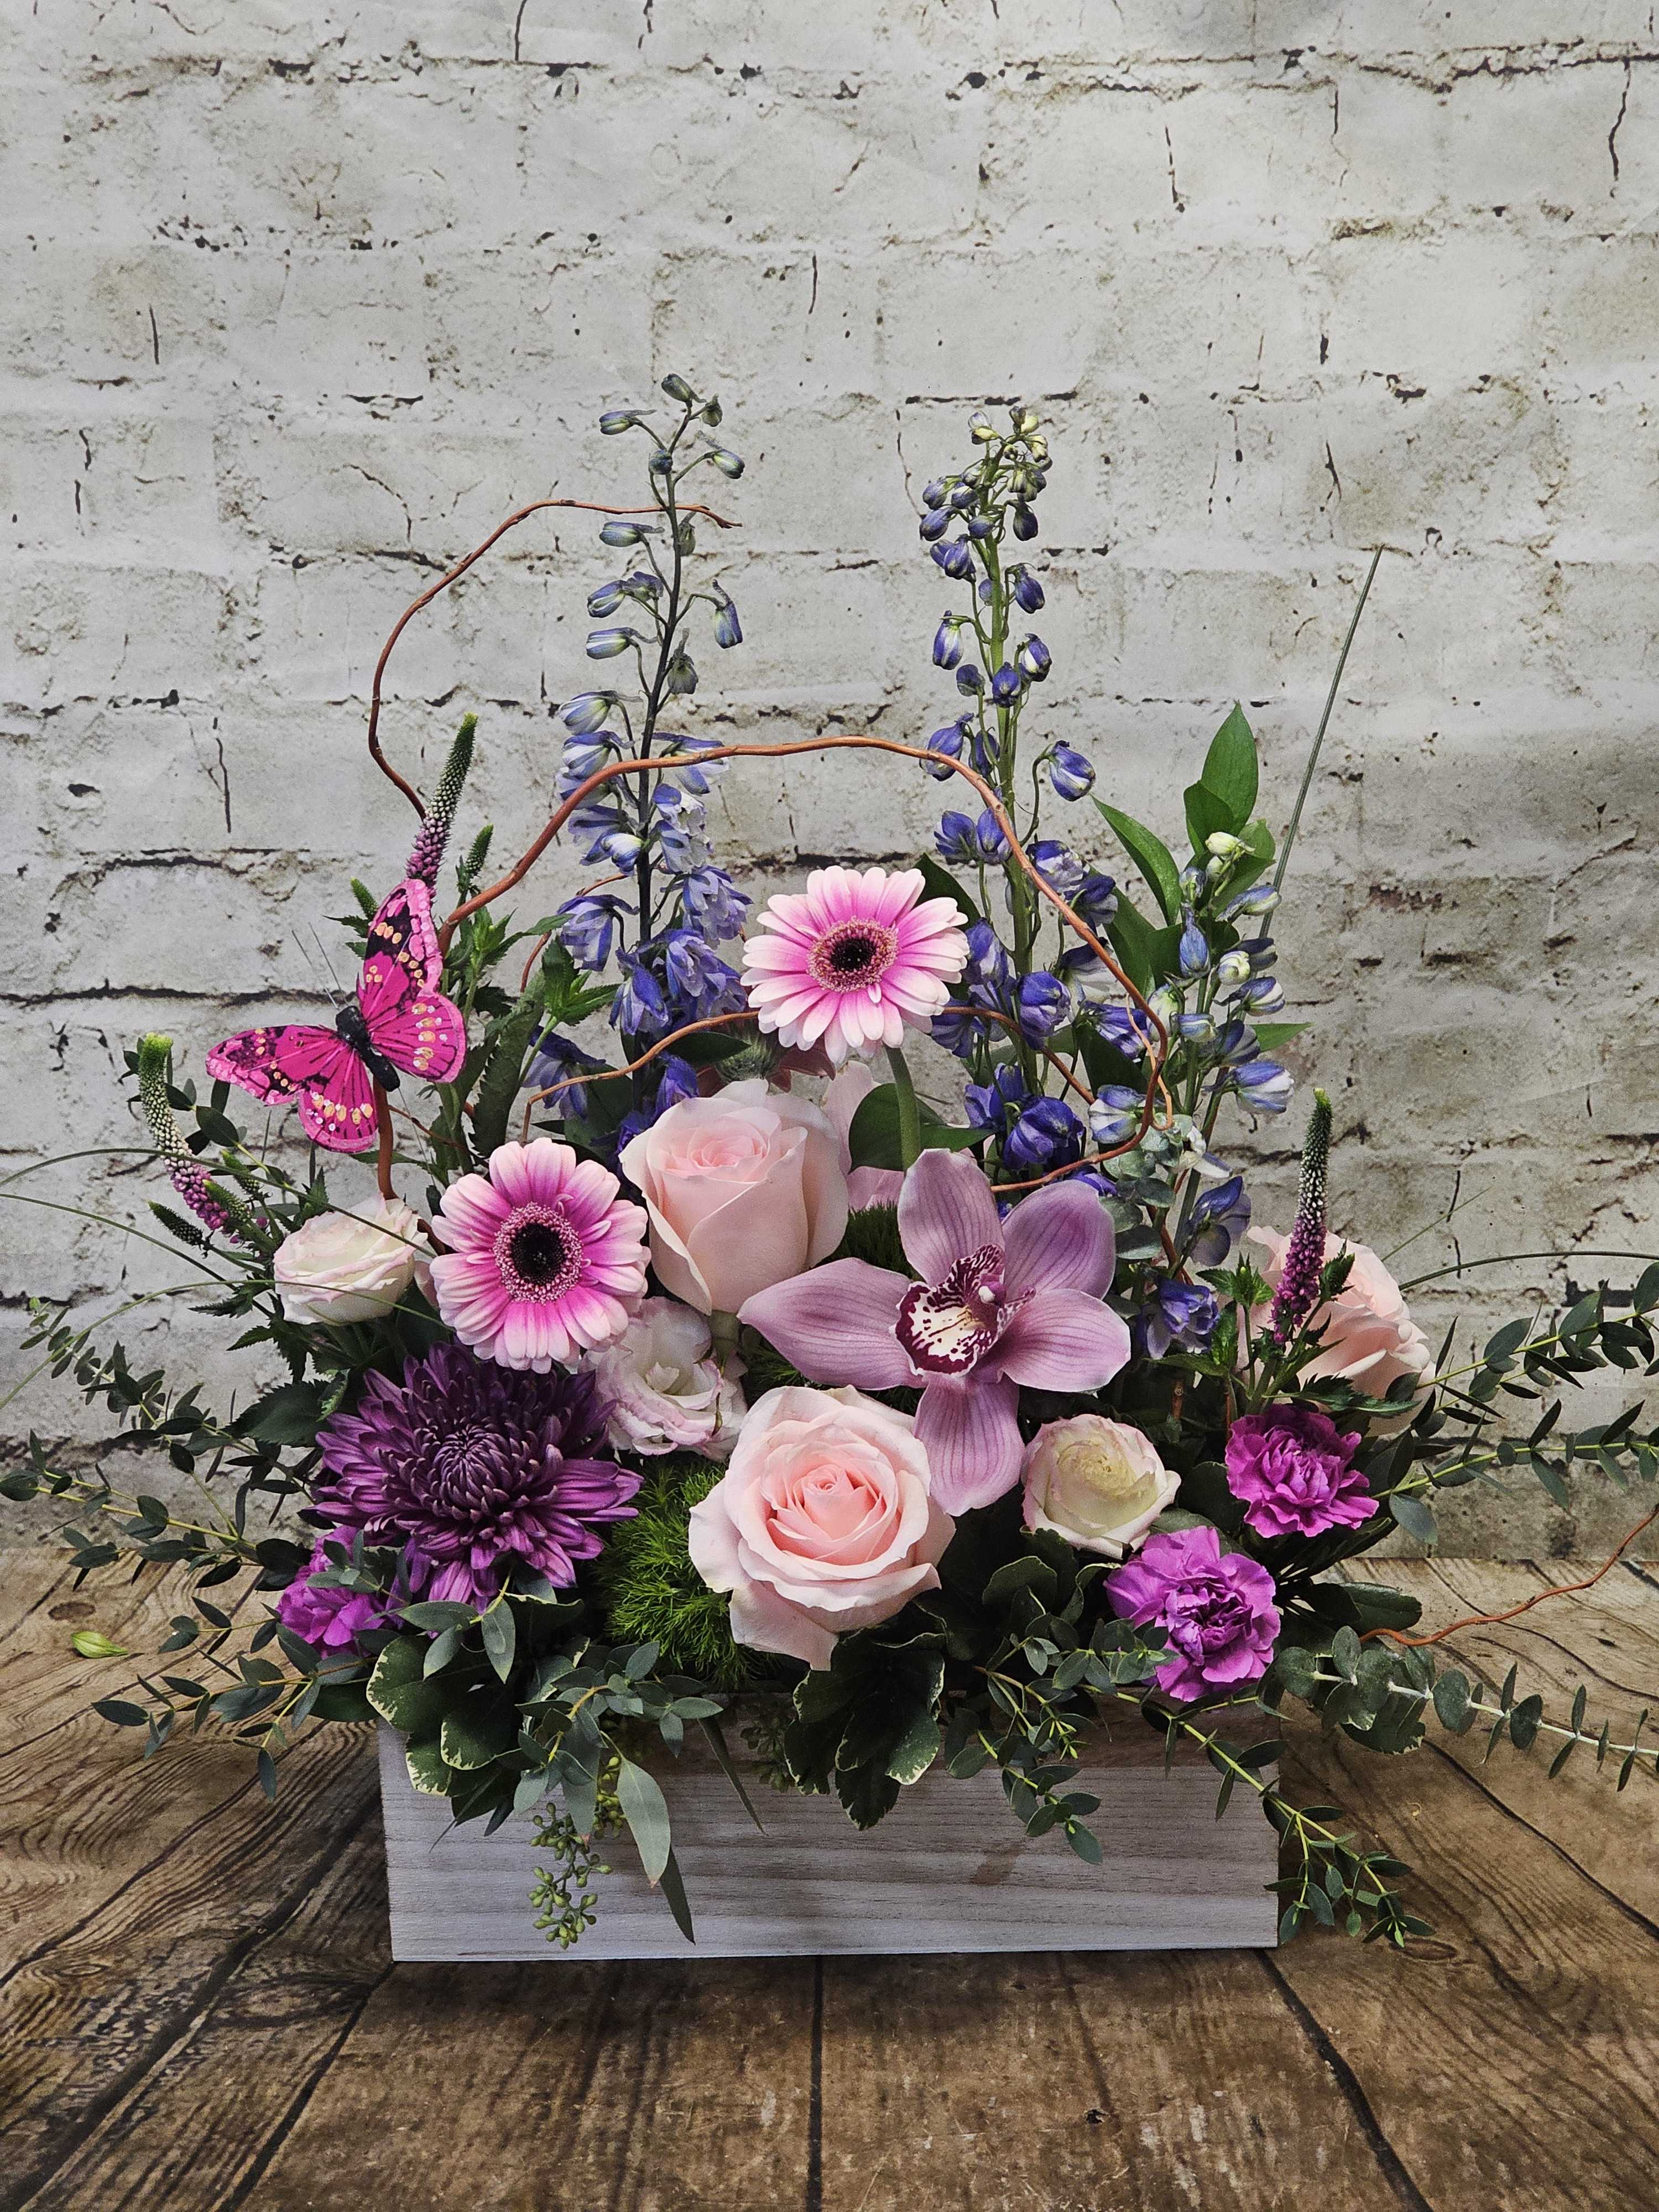 Wild at Heart - A Rustic wooden box filled with an assortment of roses,delphinium, orchids and gerbera daisies with a dancing butterfly 